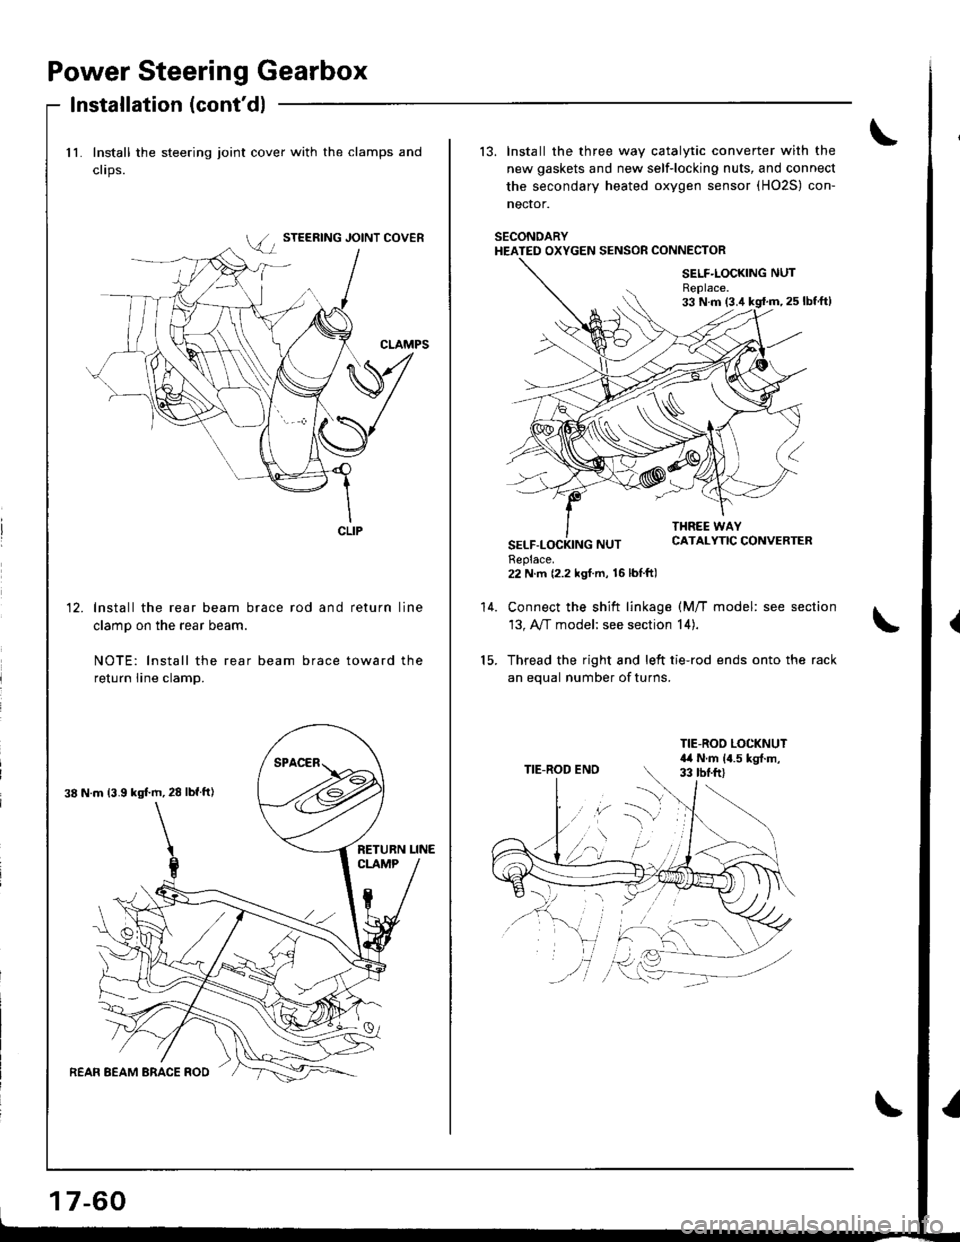 HONDA INTEGRA 1998 4.G Workshop Manual Power Steering Gearbox
Installation (contdl
11. Install the steering joint cover with the clamps and
clips.
lnstall the rear beam brace rod and return line
clamp on the rear beam.
NOTE: lnstall the r